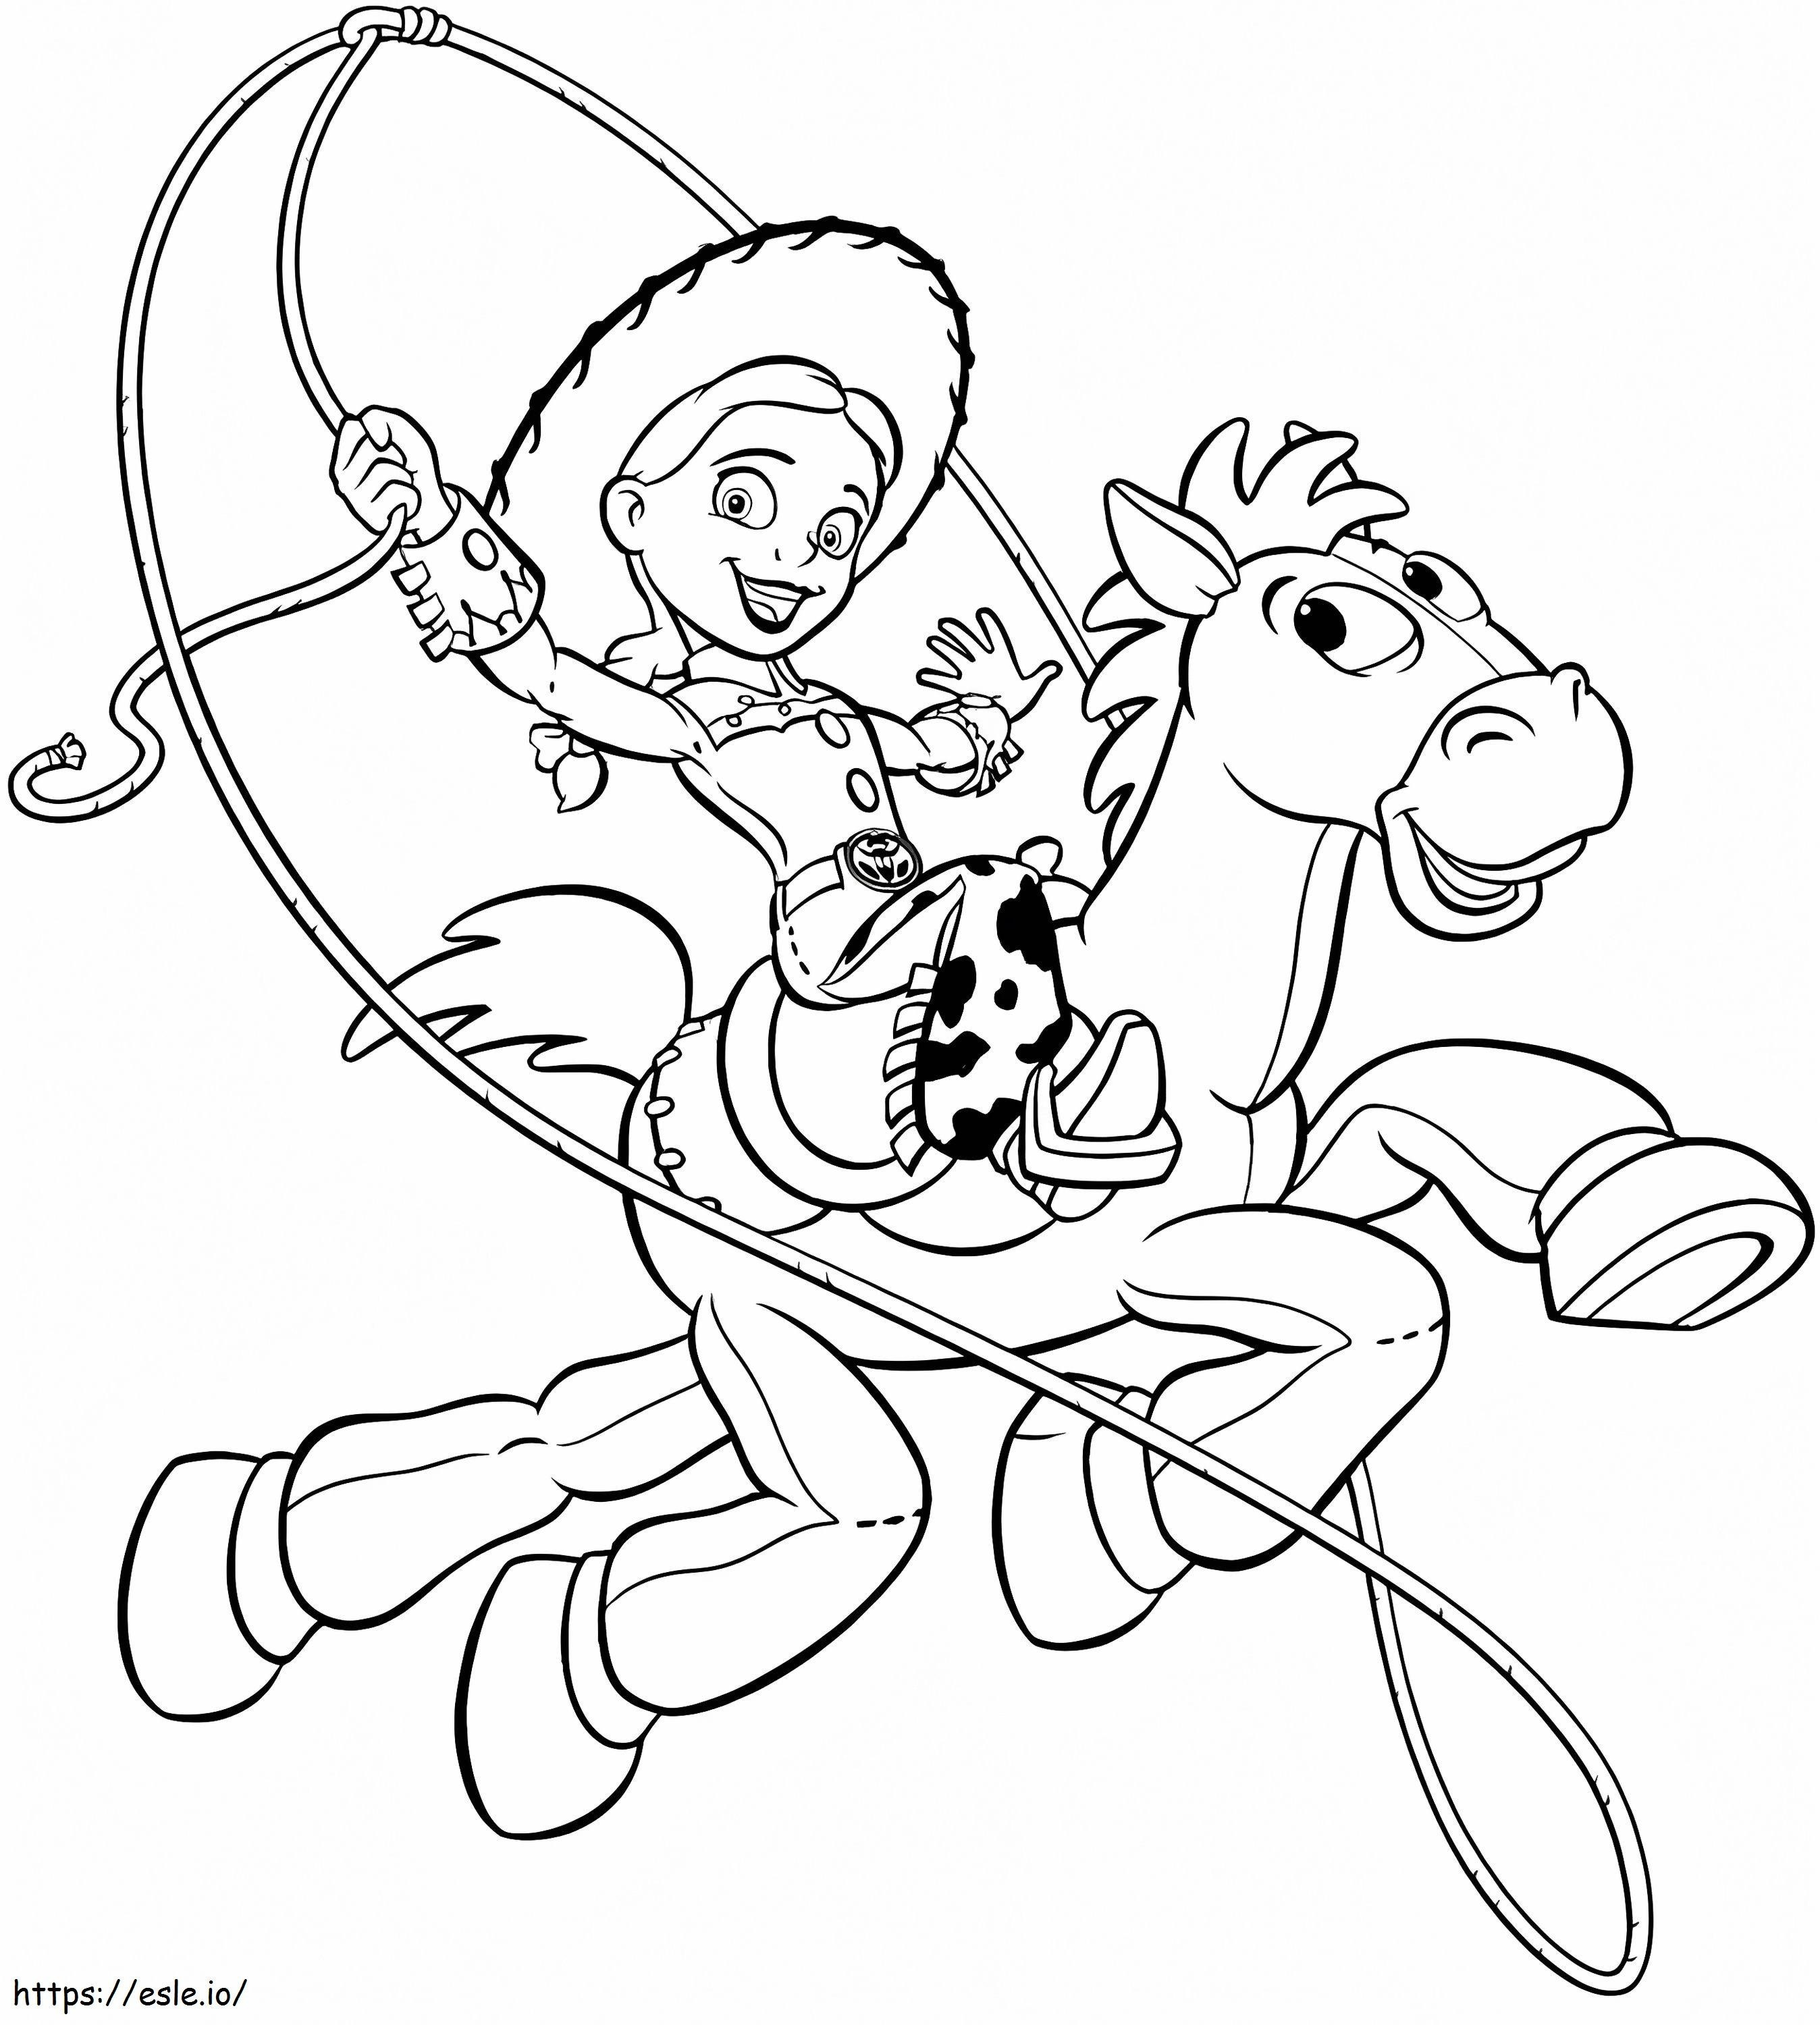 Jessie Riding Diana coloring page